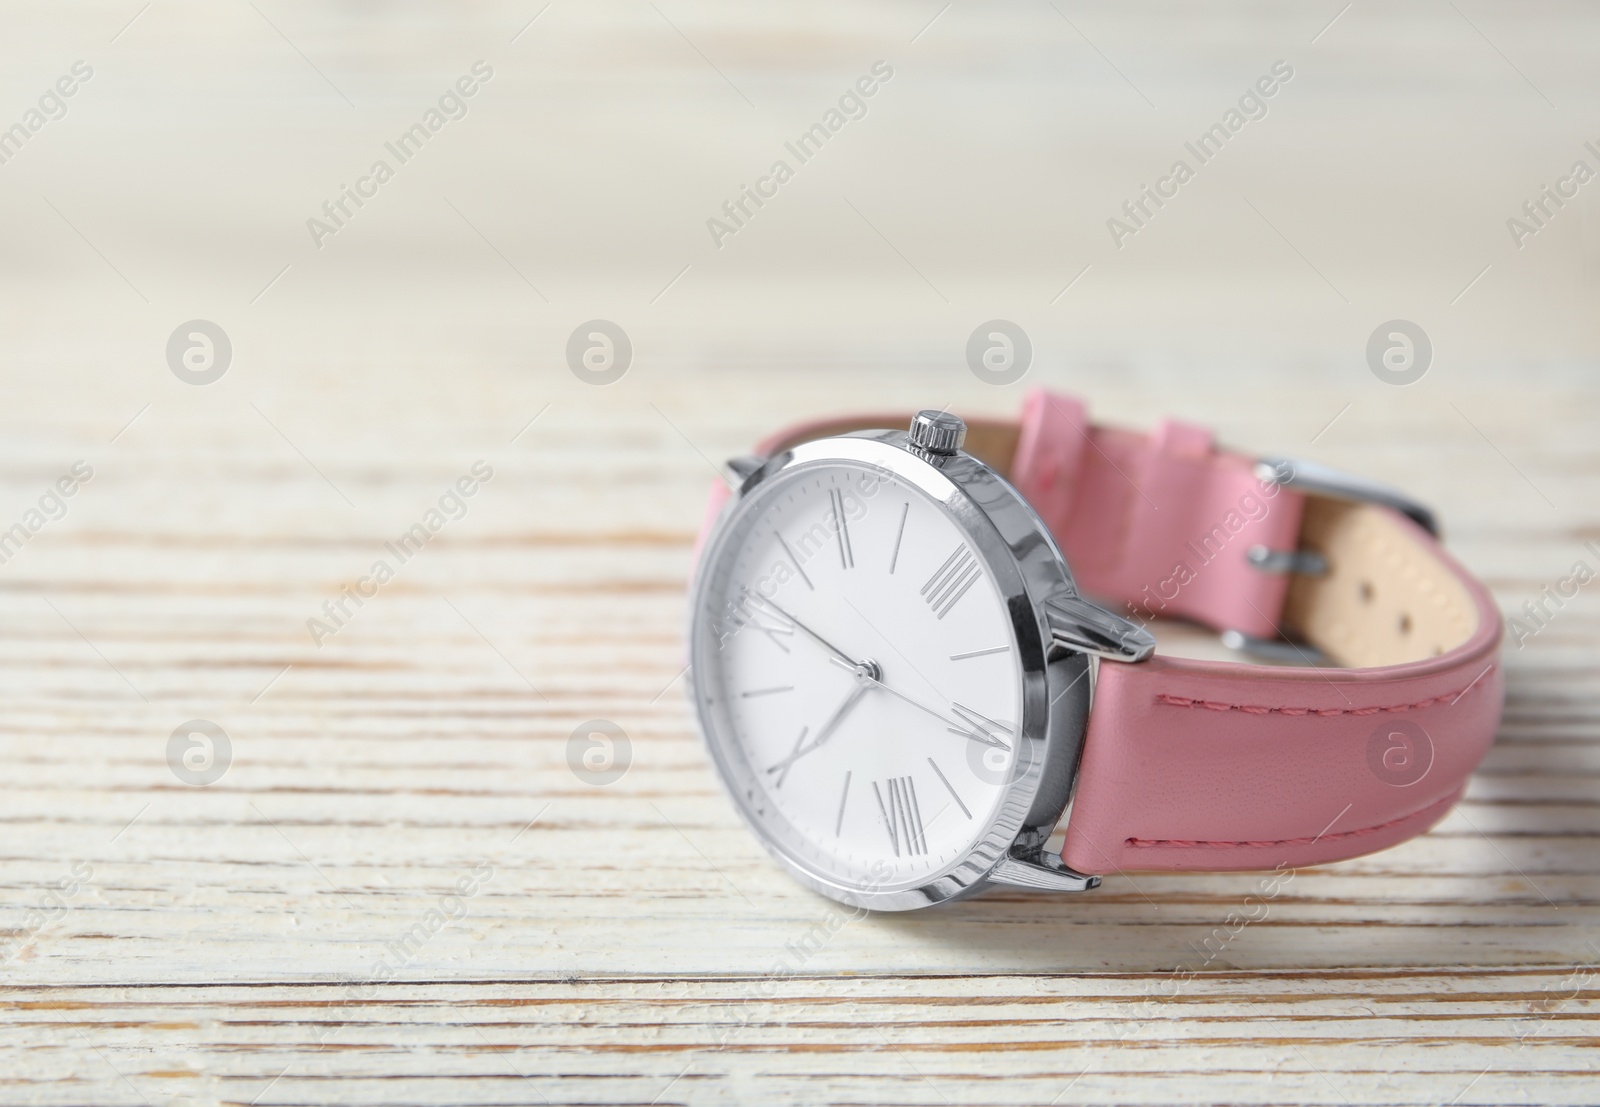 Photo of Stylish women's wrist watch on wooden table, space for text. Fashion accessory